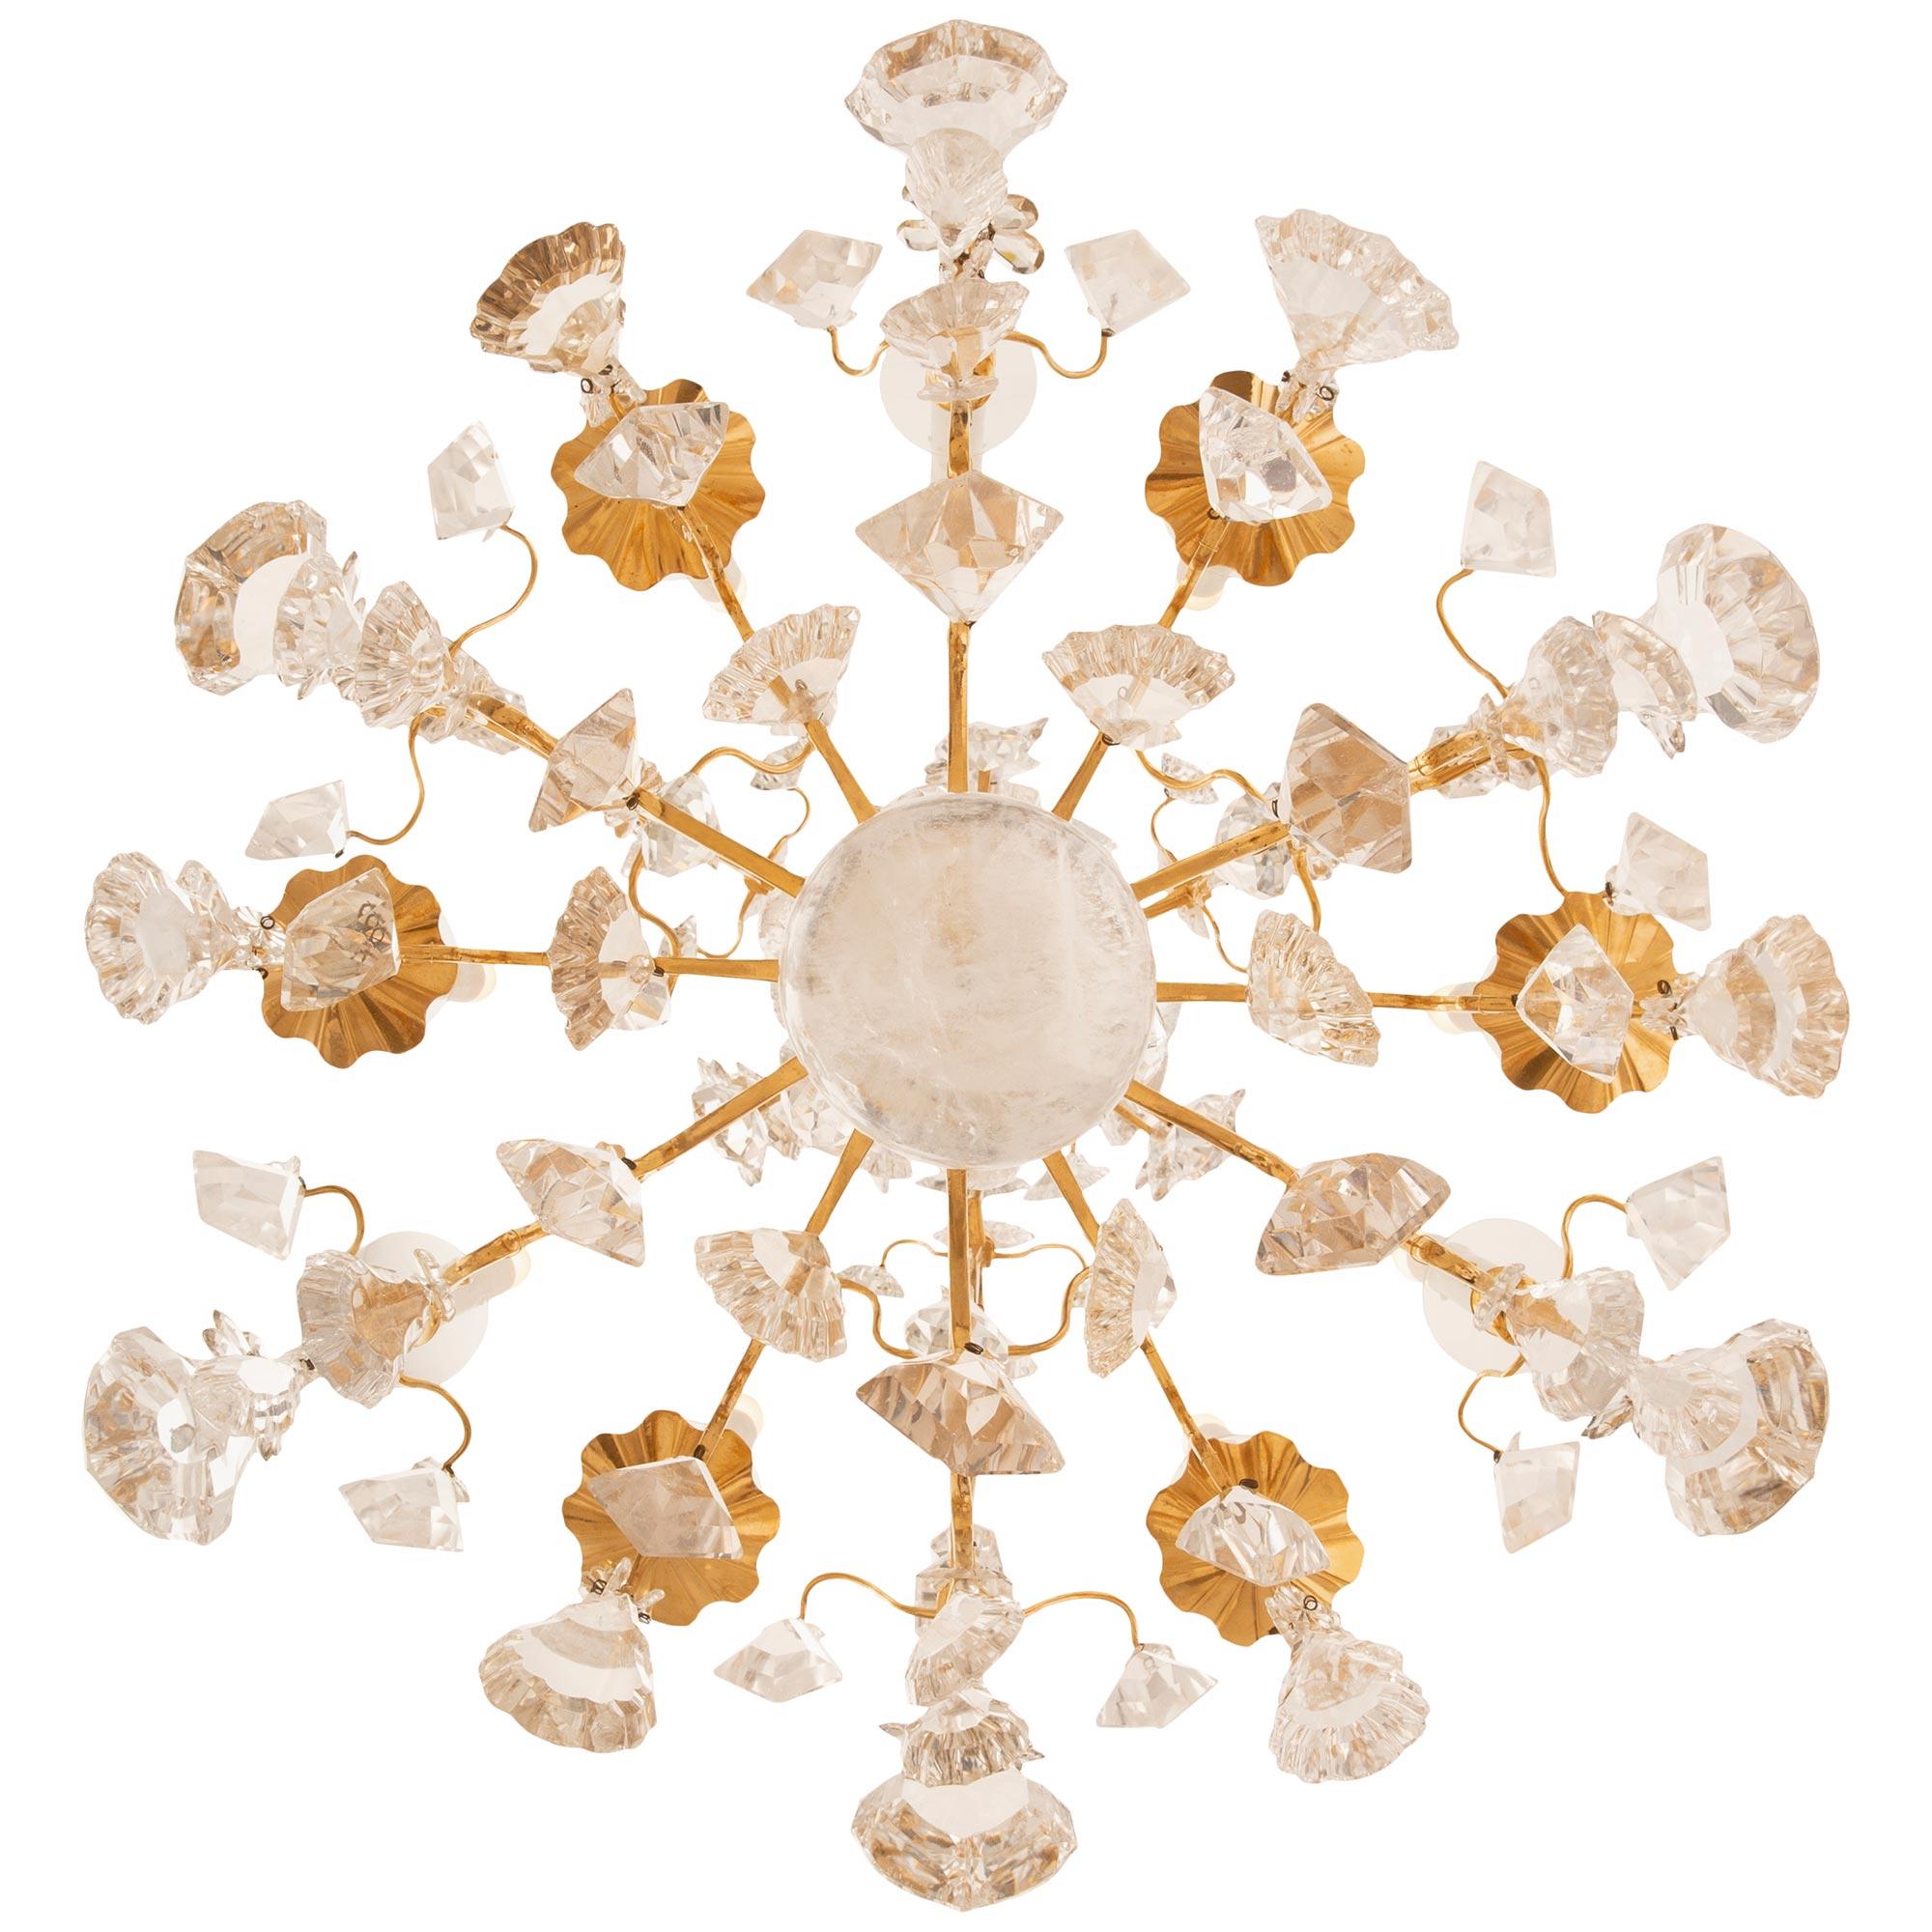 A high quality French 19th century Louis XV st. Ormolu, Rock Crystal and Crystal chandelier. The nine arm open scrolled Ormolu cage has three main supporting arms with cut prisms and decorative rock crystal daggers all below additional crystals and